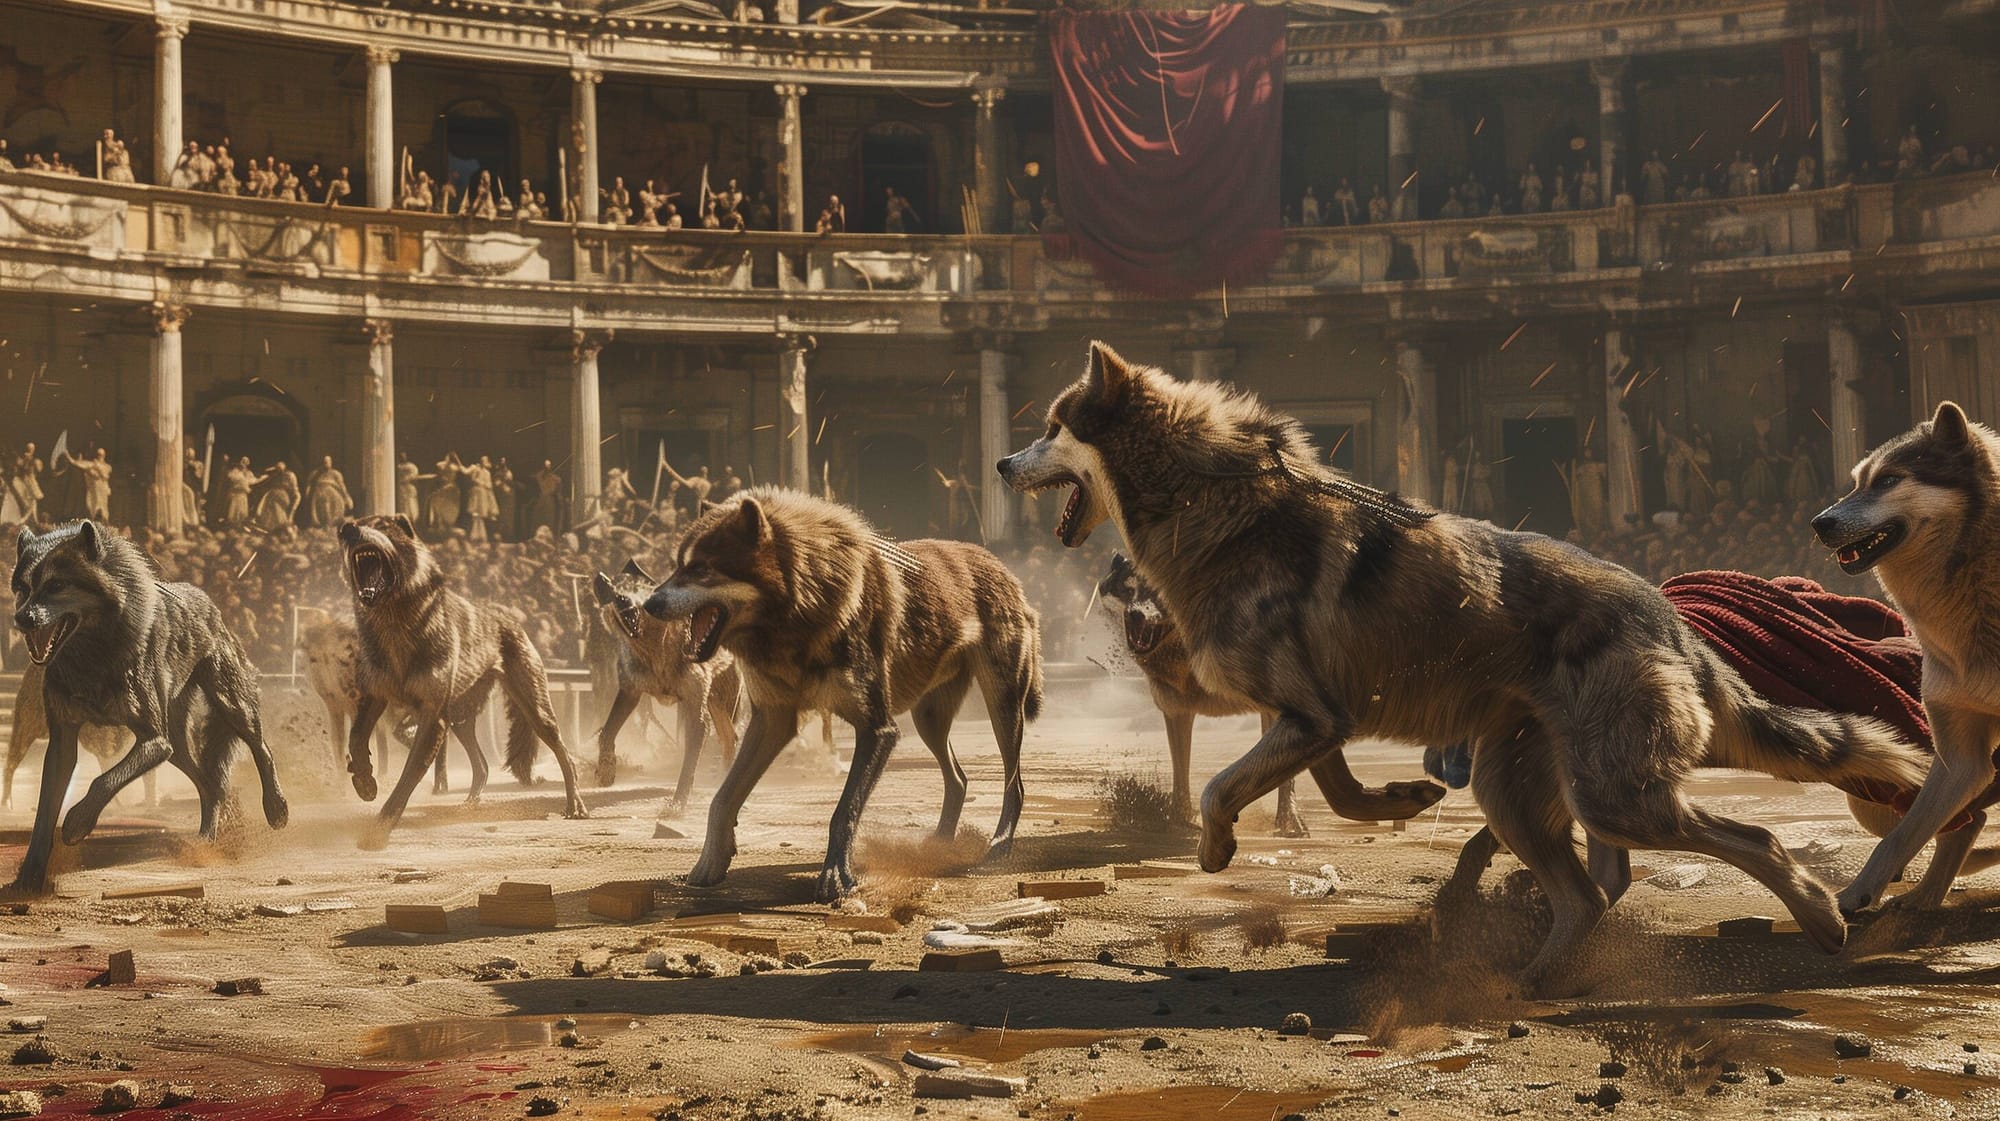 Wild dogs in a Roman arena, violently attacking Christians at the orders of Emperor Nero.